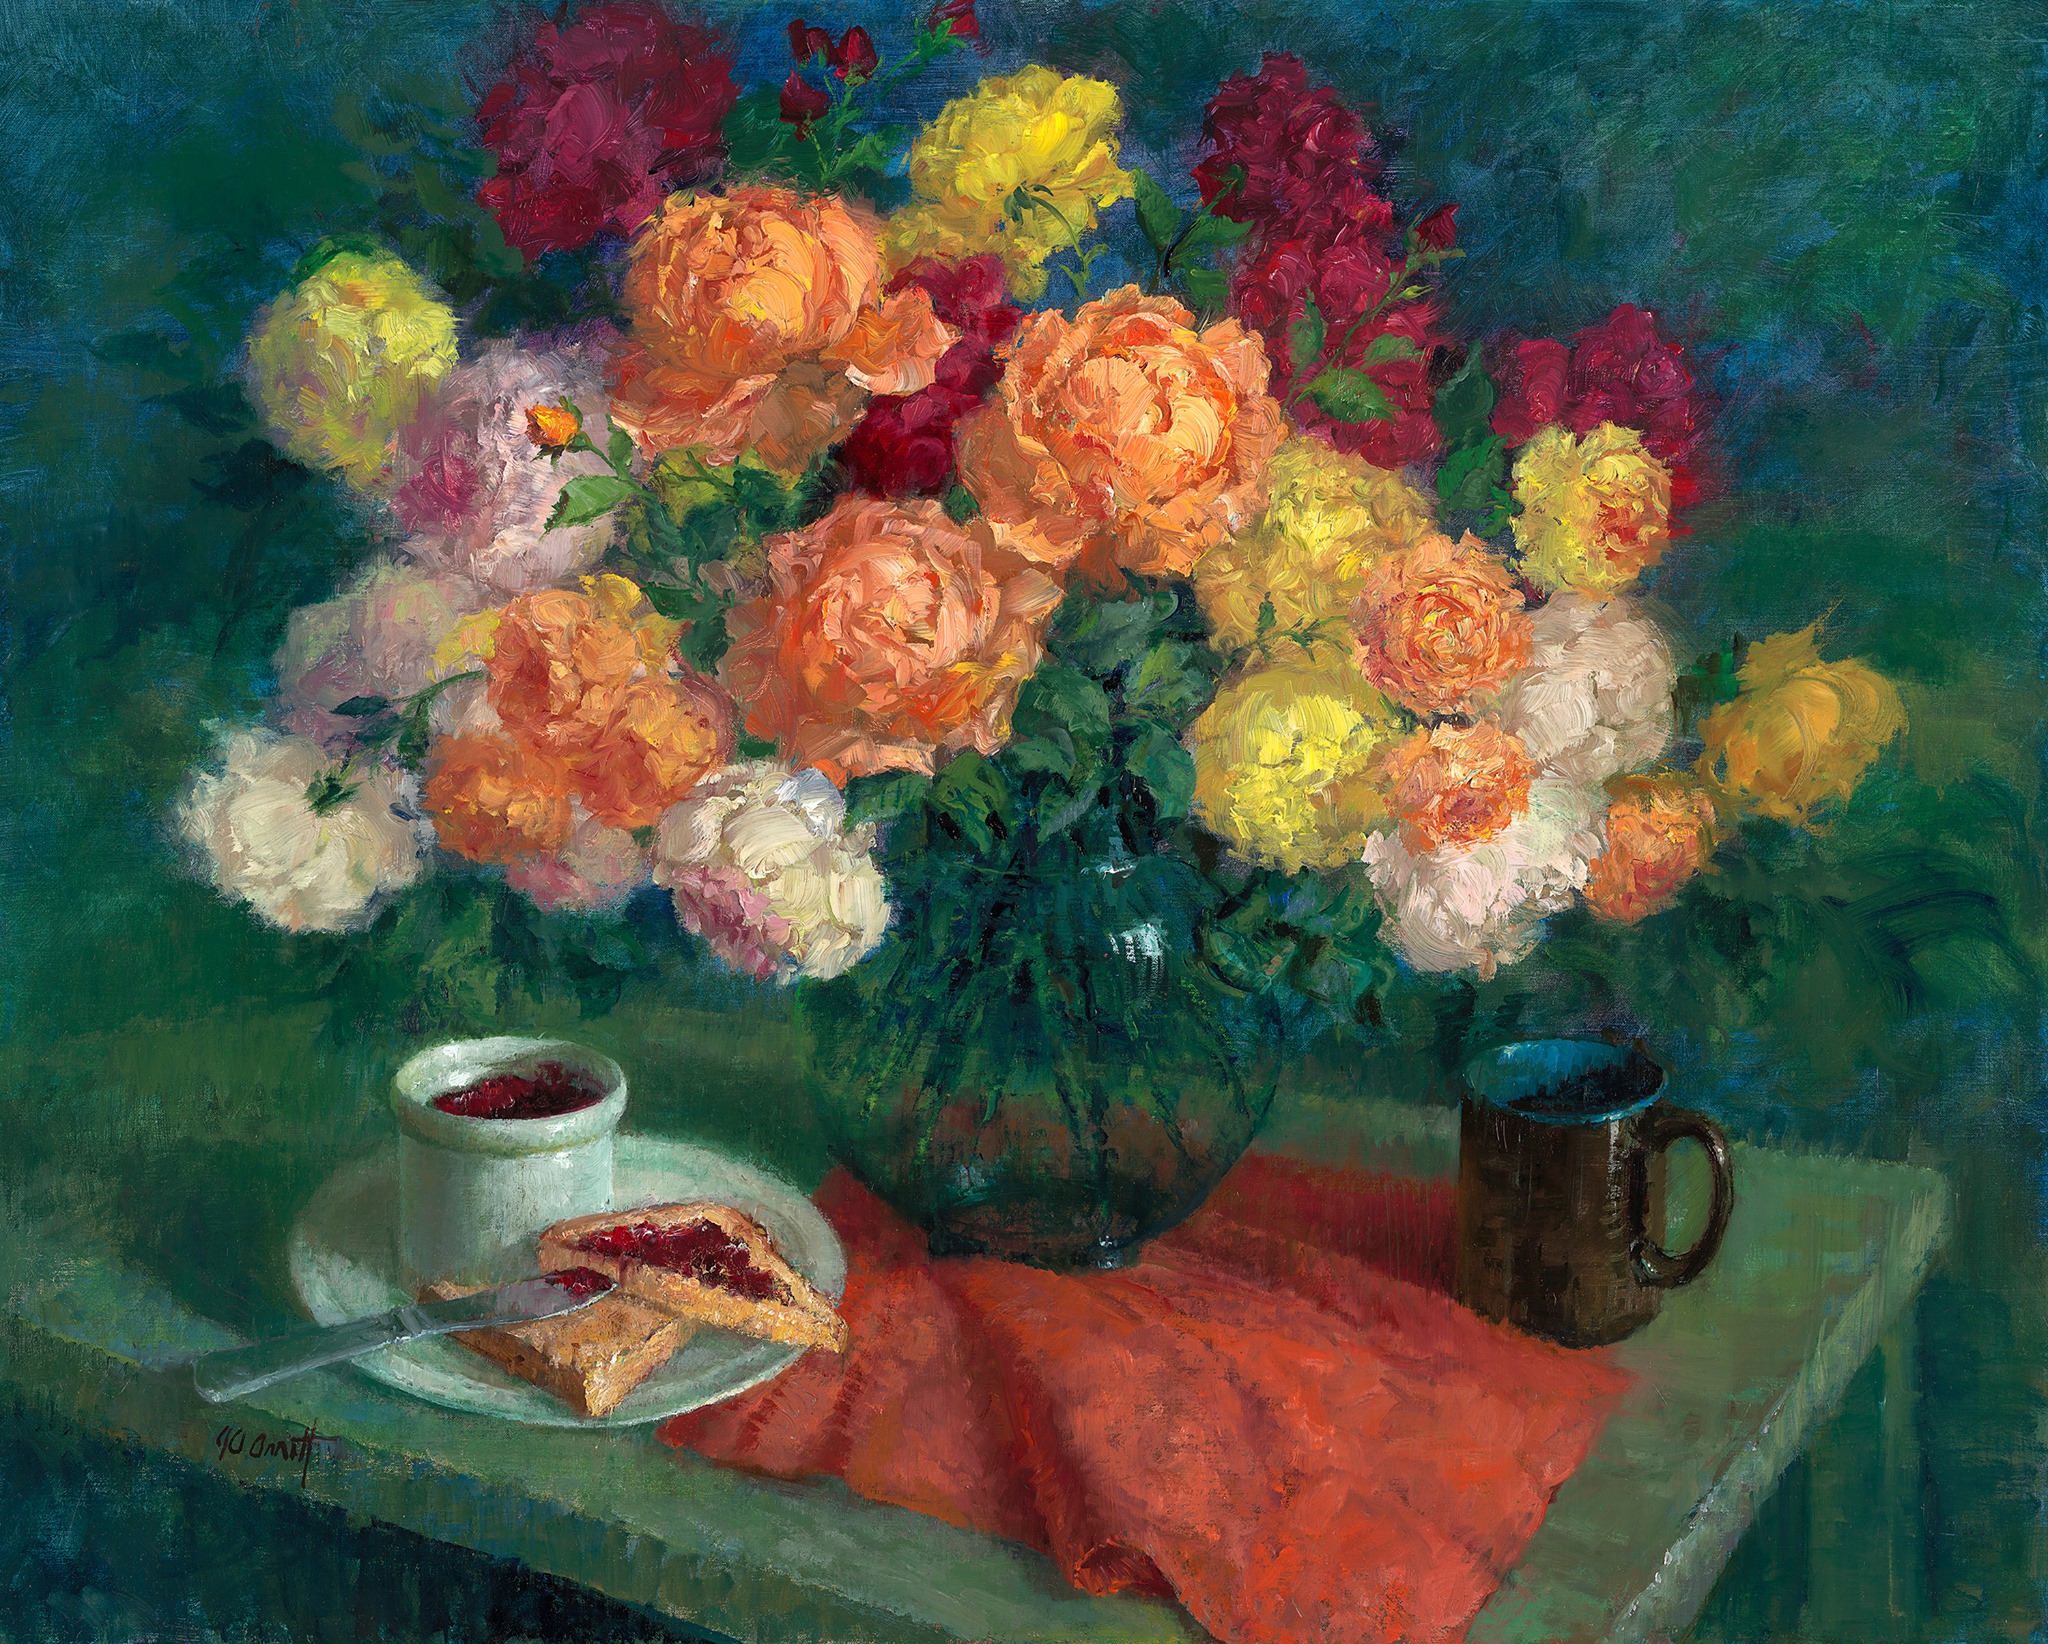 Joe Anna Arnett, "Breakfast with Roses," oil, 24 x 30 in. She said this "was painted en plein air, in my garden, over several sessions. Yes. I am such a lucky artist."